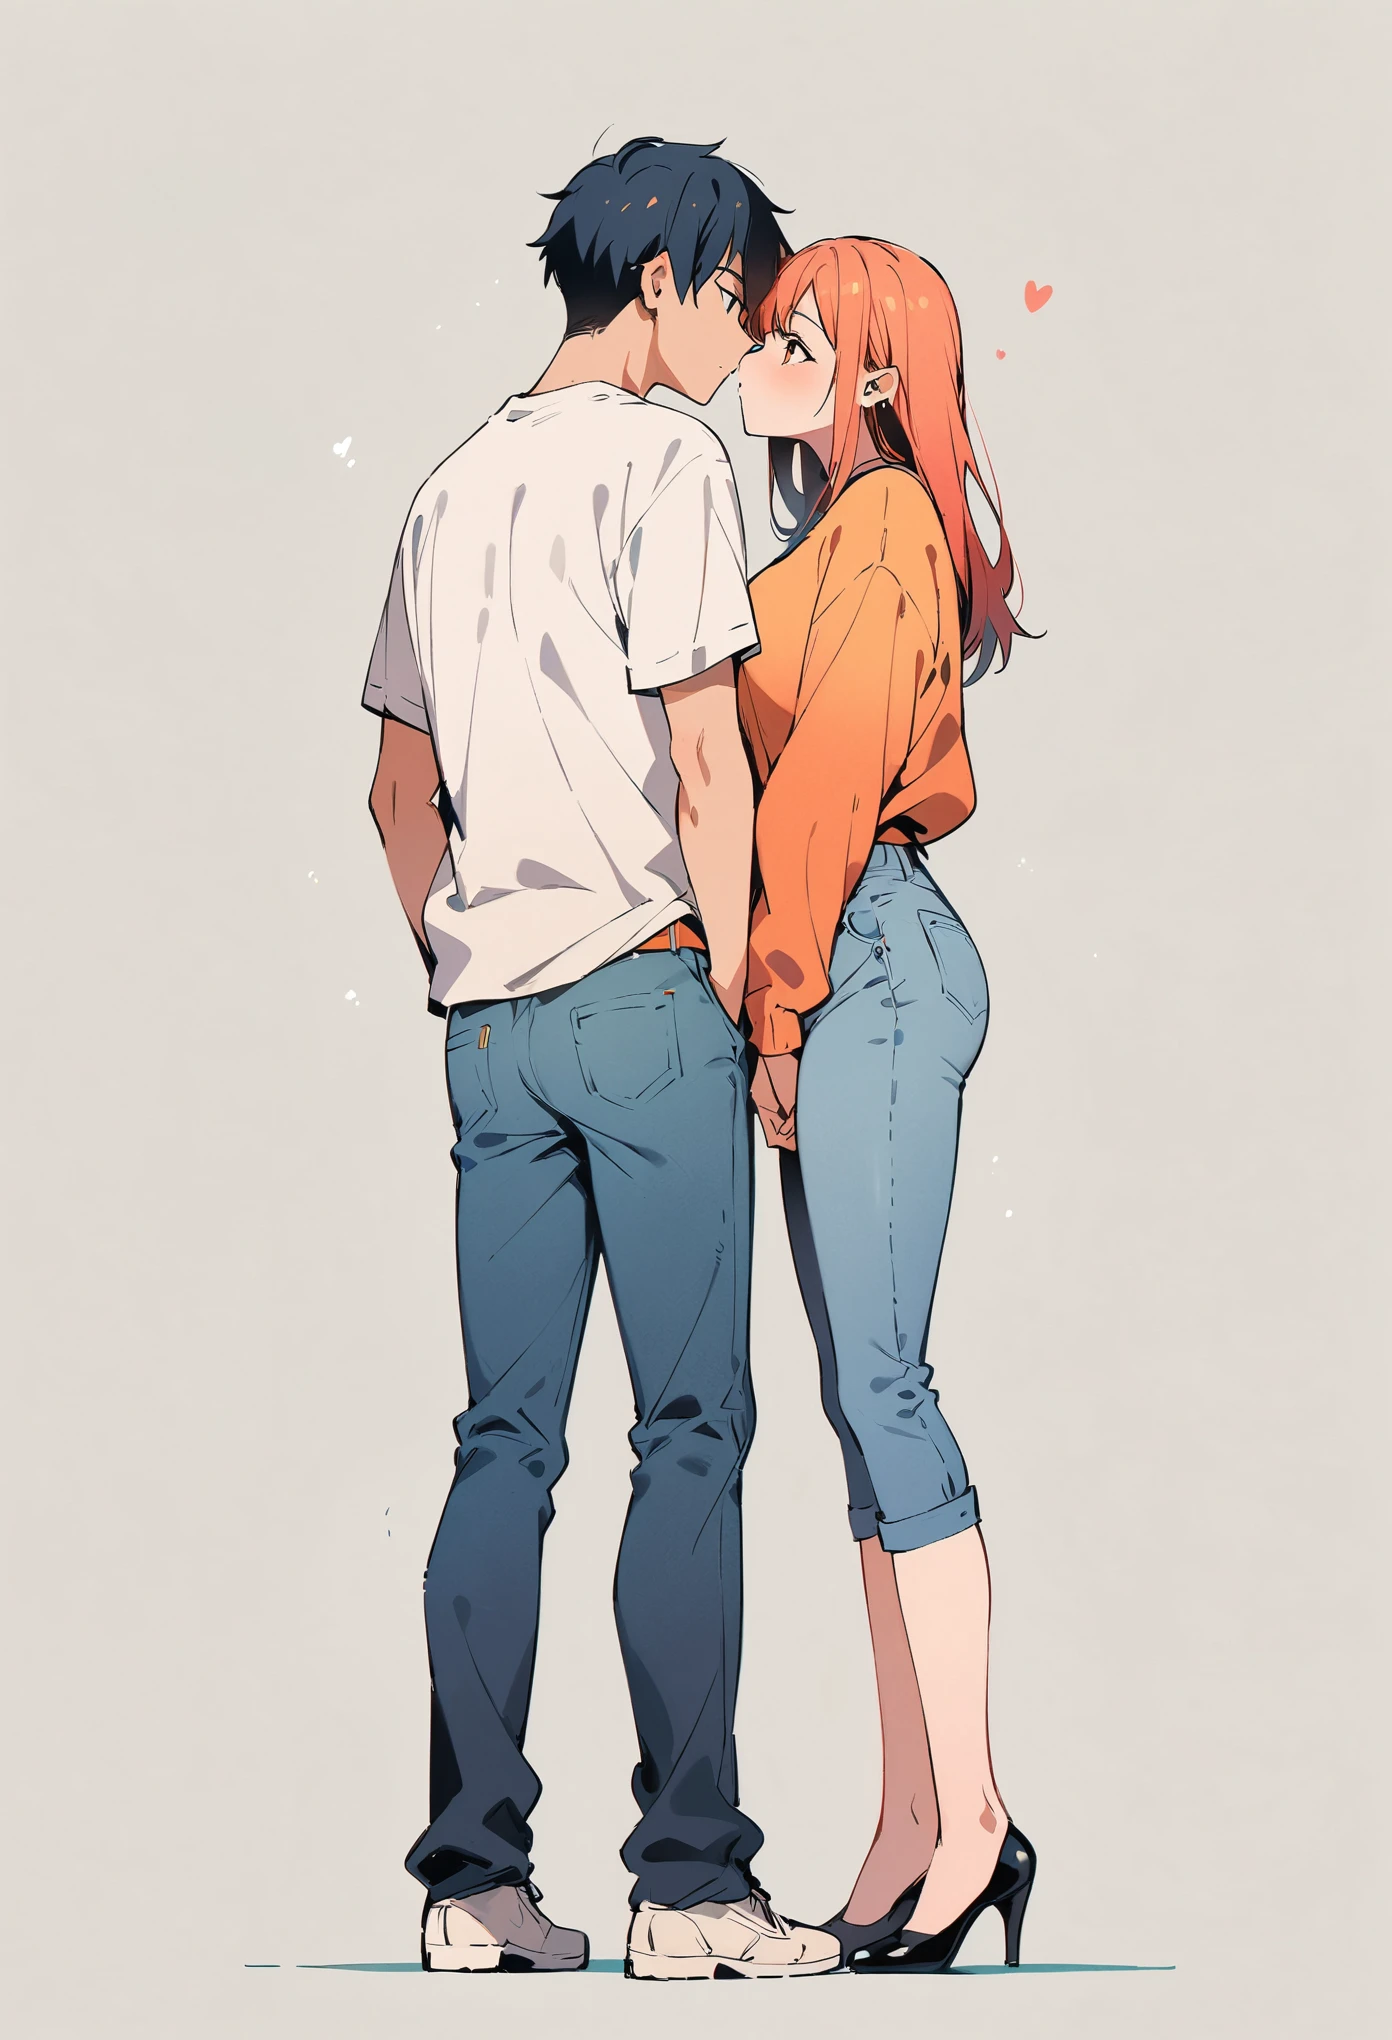 (best quality:1.2), 1 girls,1 boy,, face to face, looking at each other, standing apart, both standing apart, kissing, blue jeans, full body